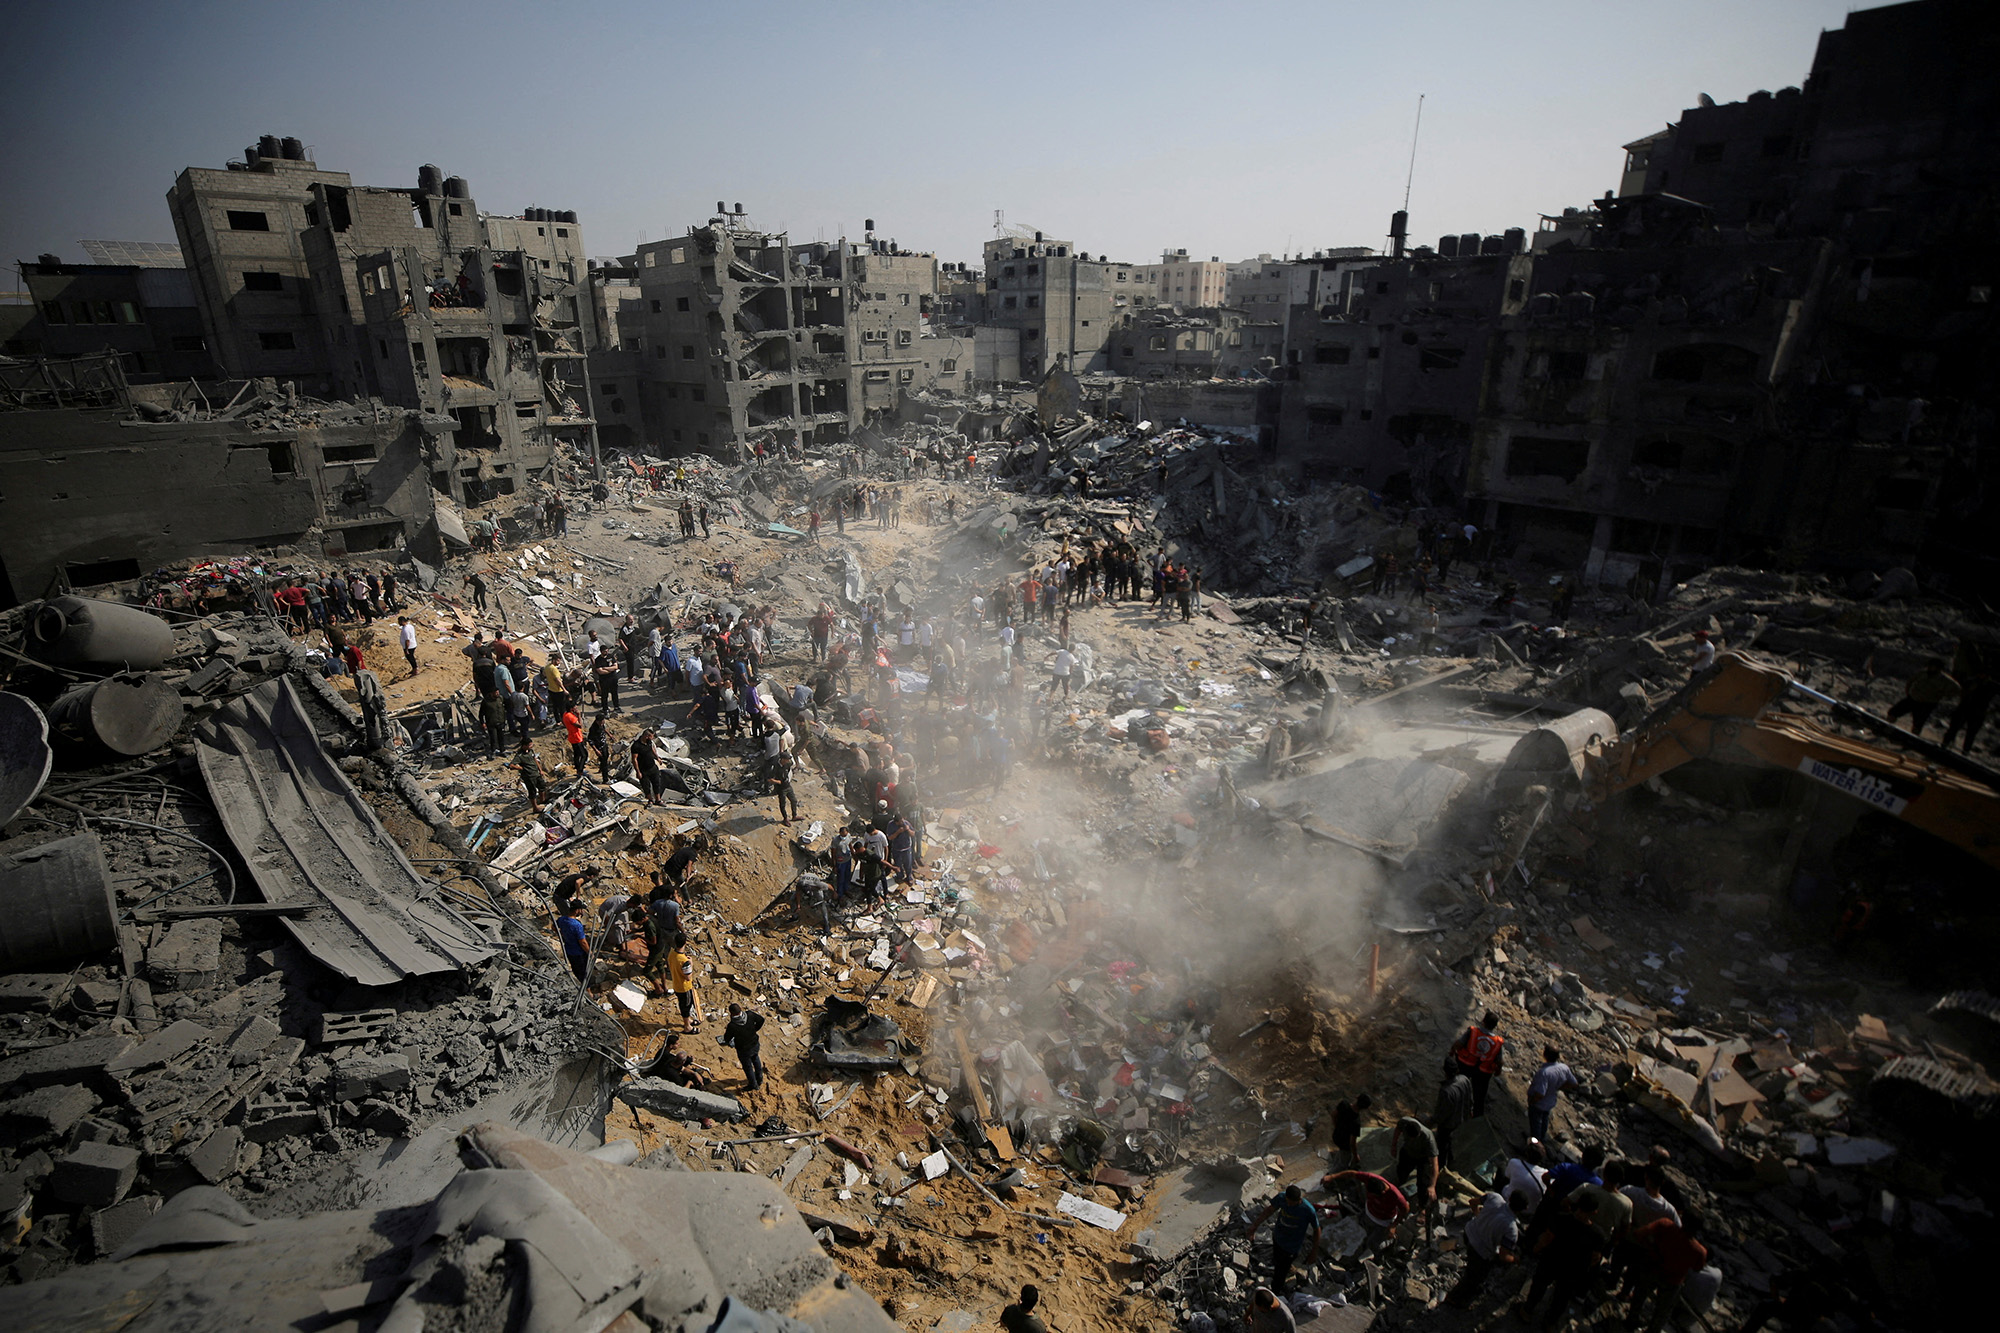 Palestinians search for casualties a day after Israeli strikes on houses in Jabalya refugee camp in Gaza, on November 1.